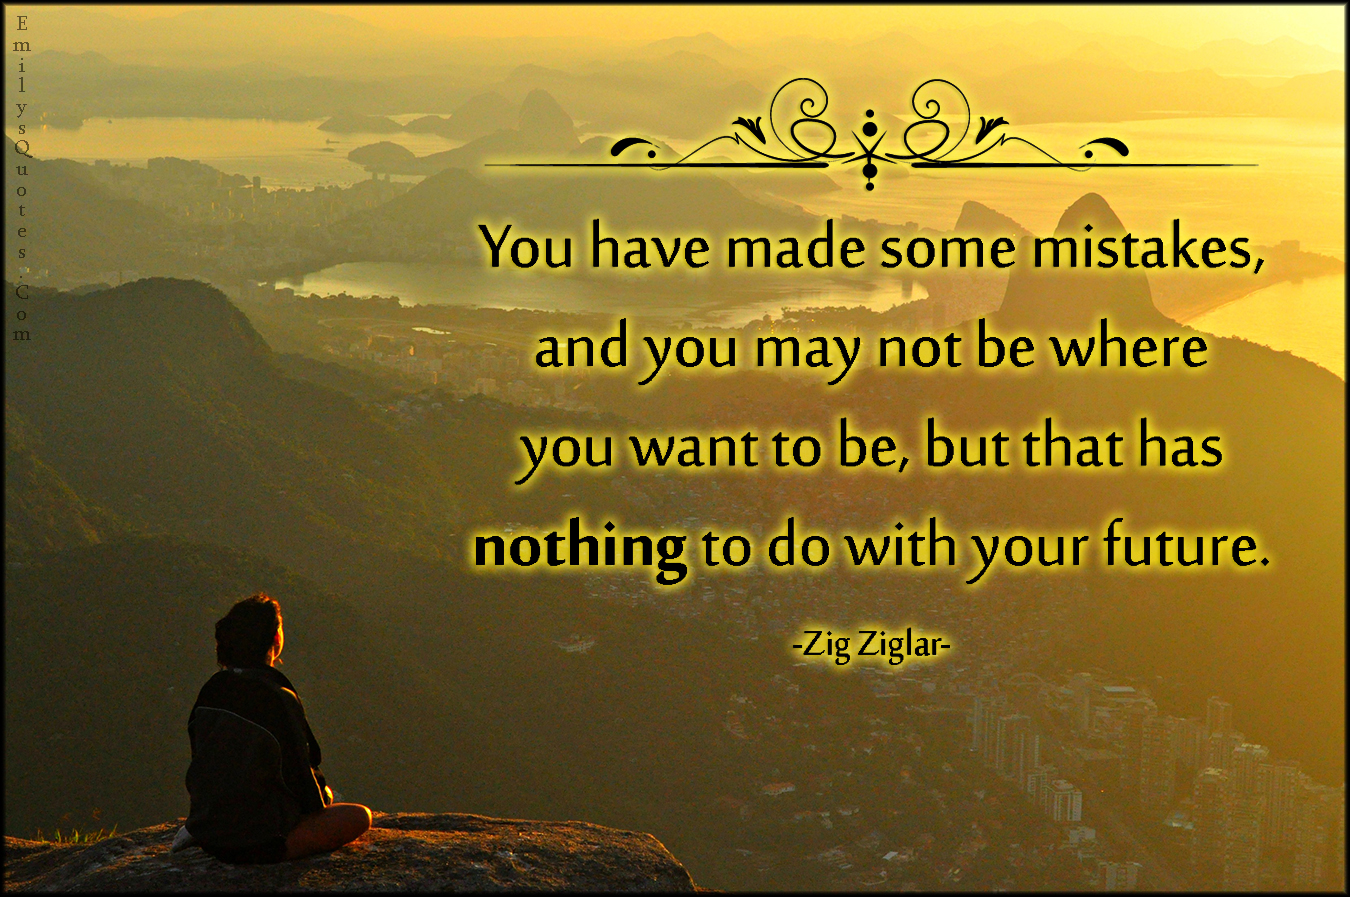 You have made some mistakes, and you may not be where you want to be, but that has nothing to do with your future